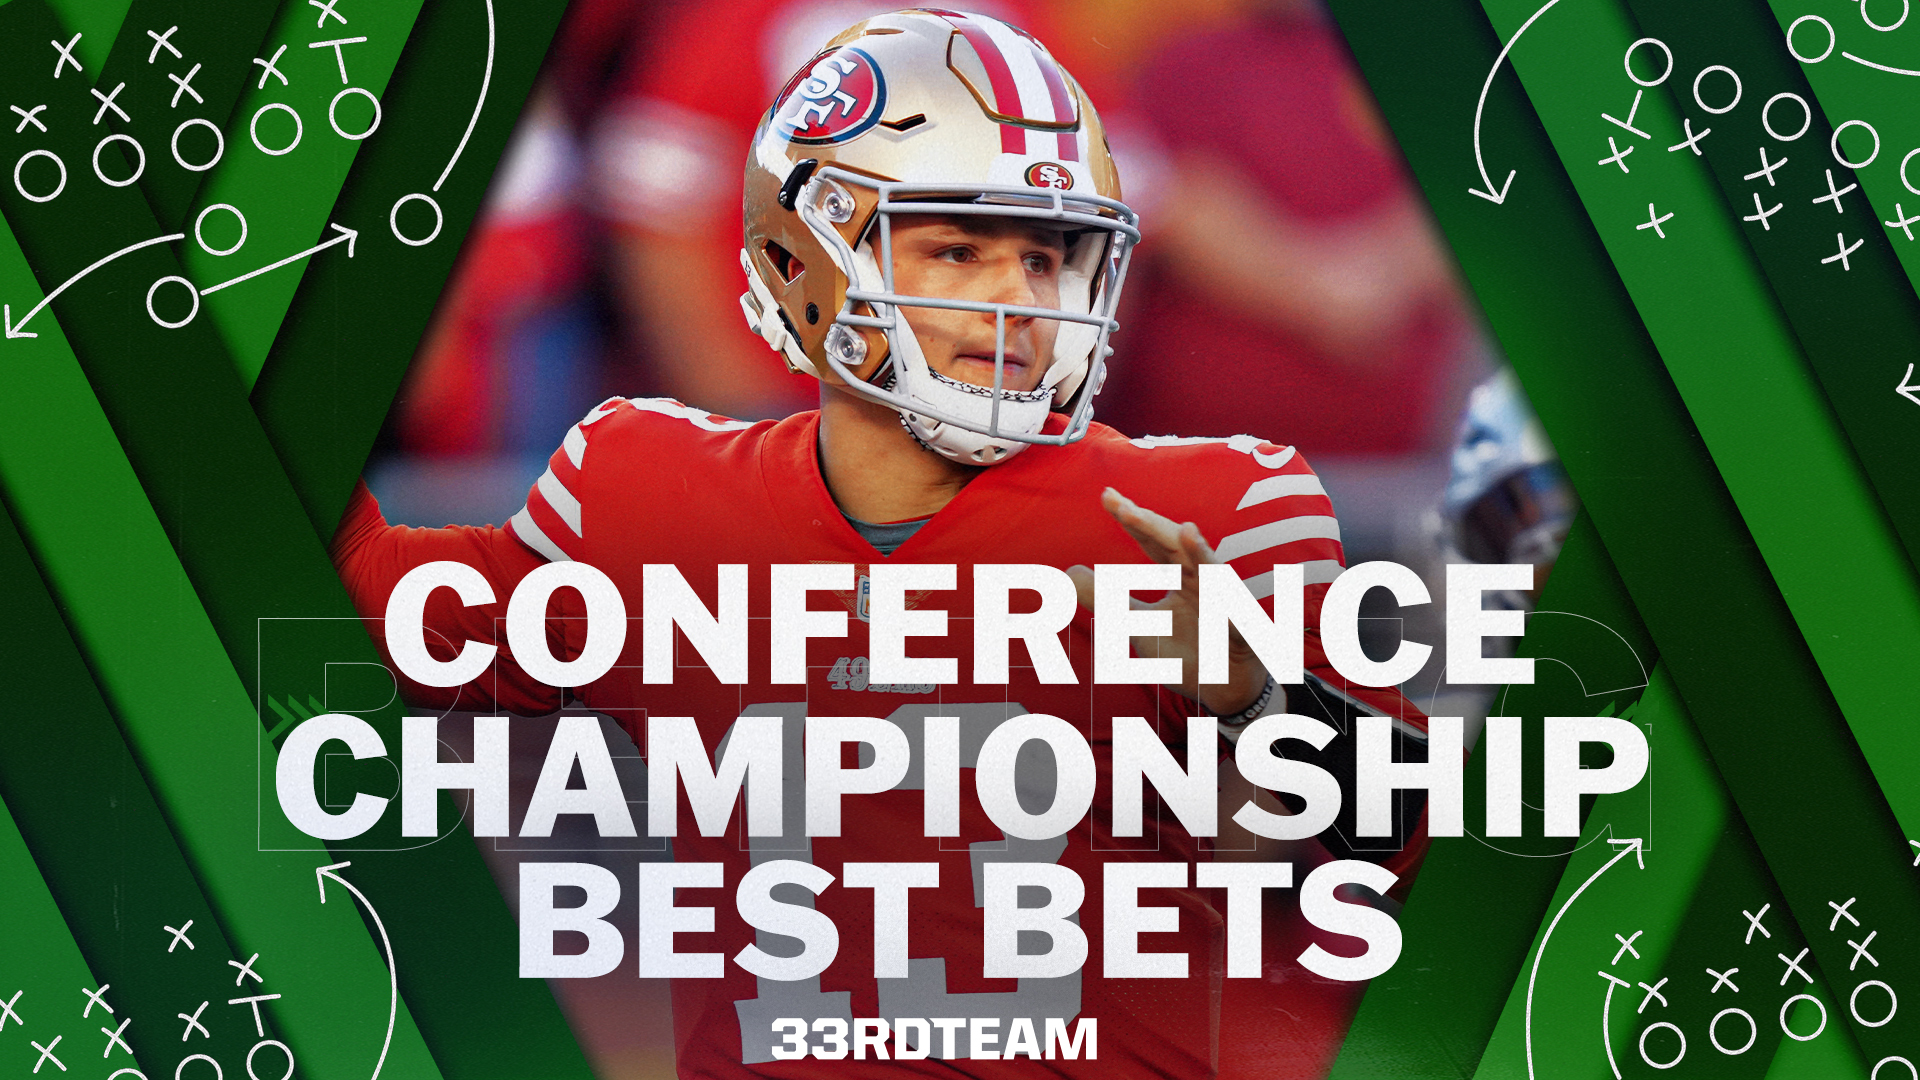 Best Bets for Conference Championship Weekend